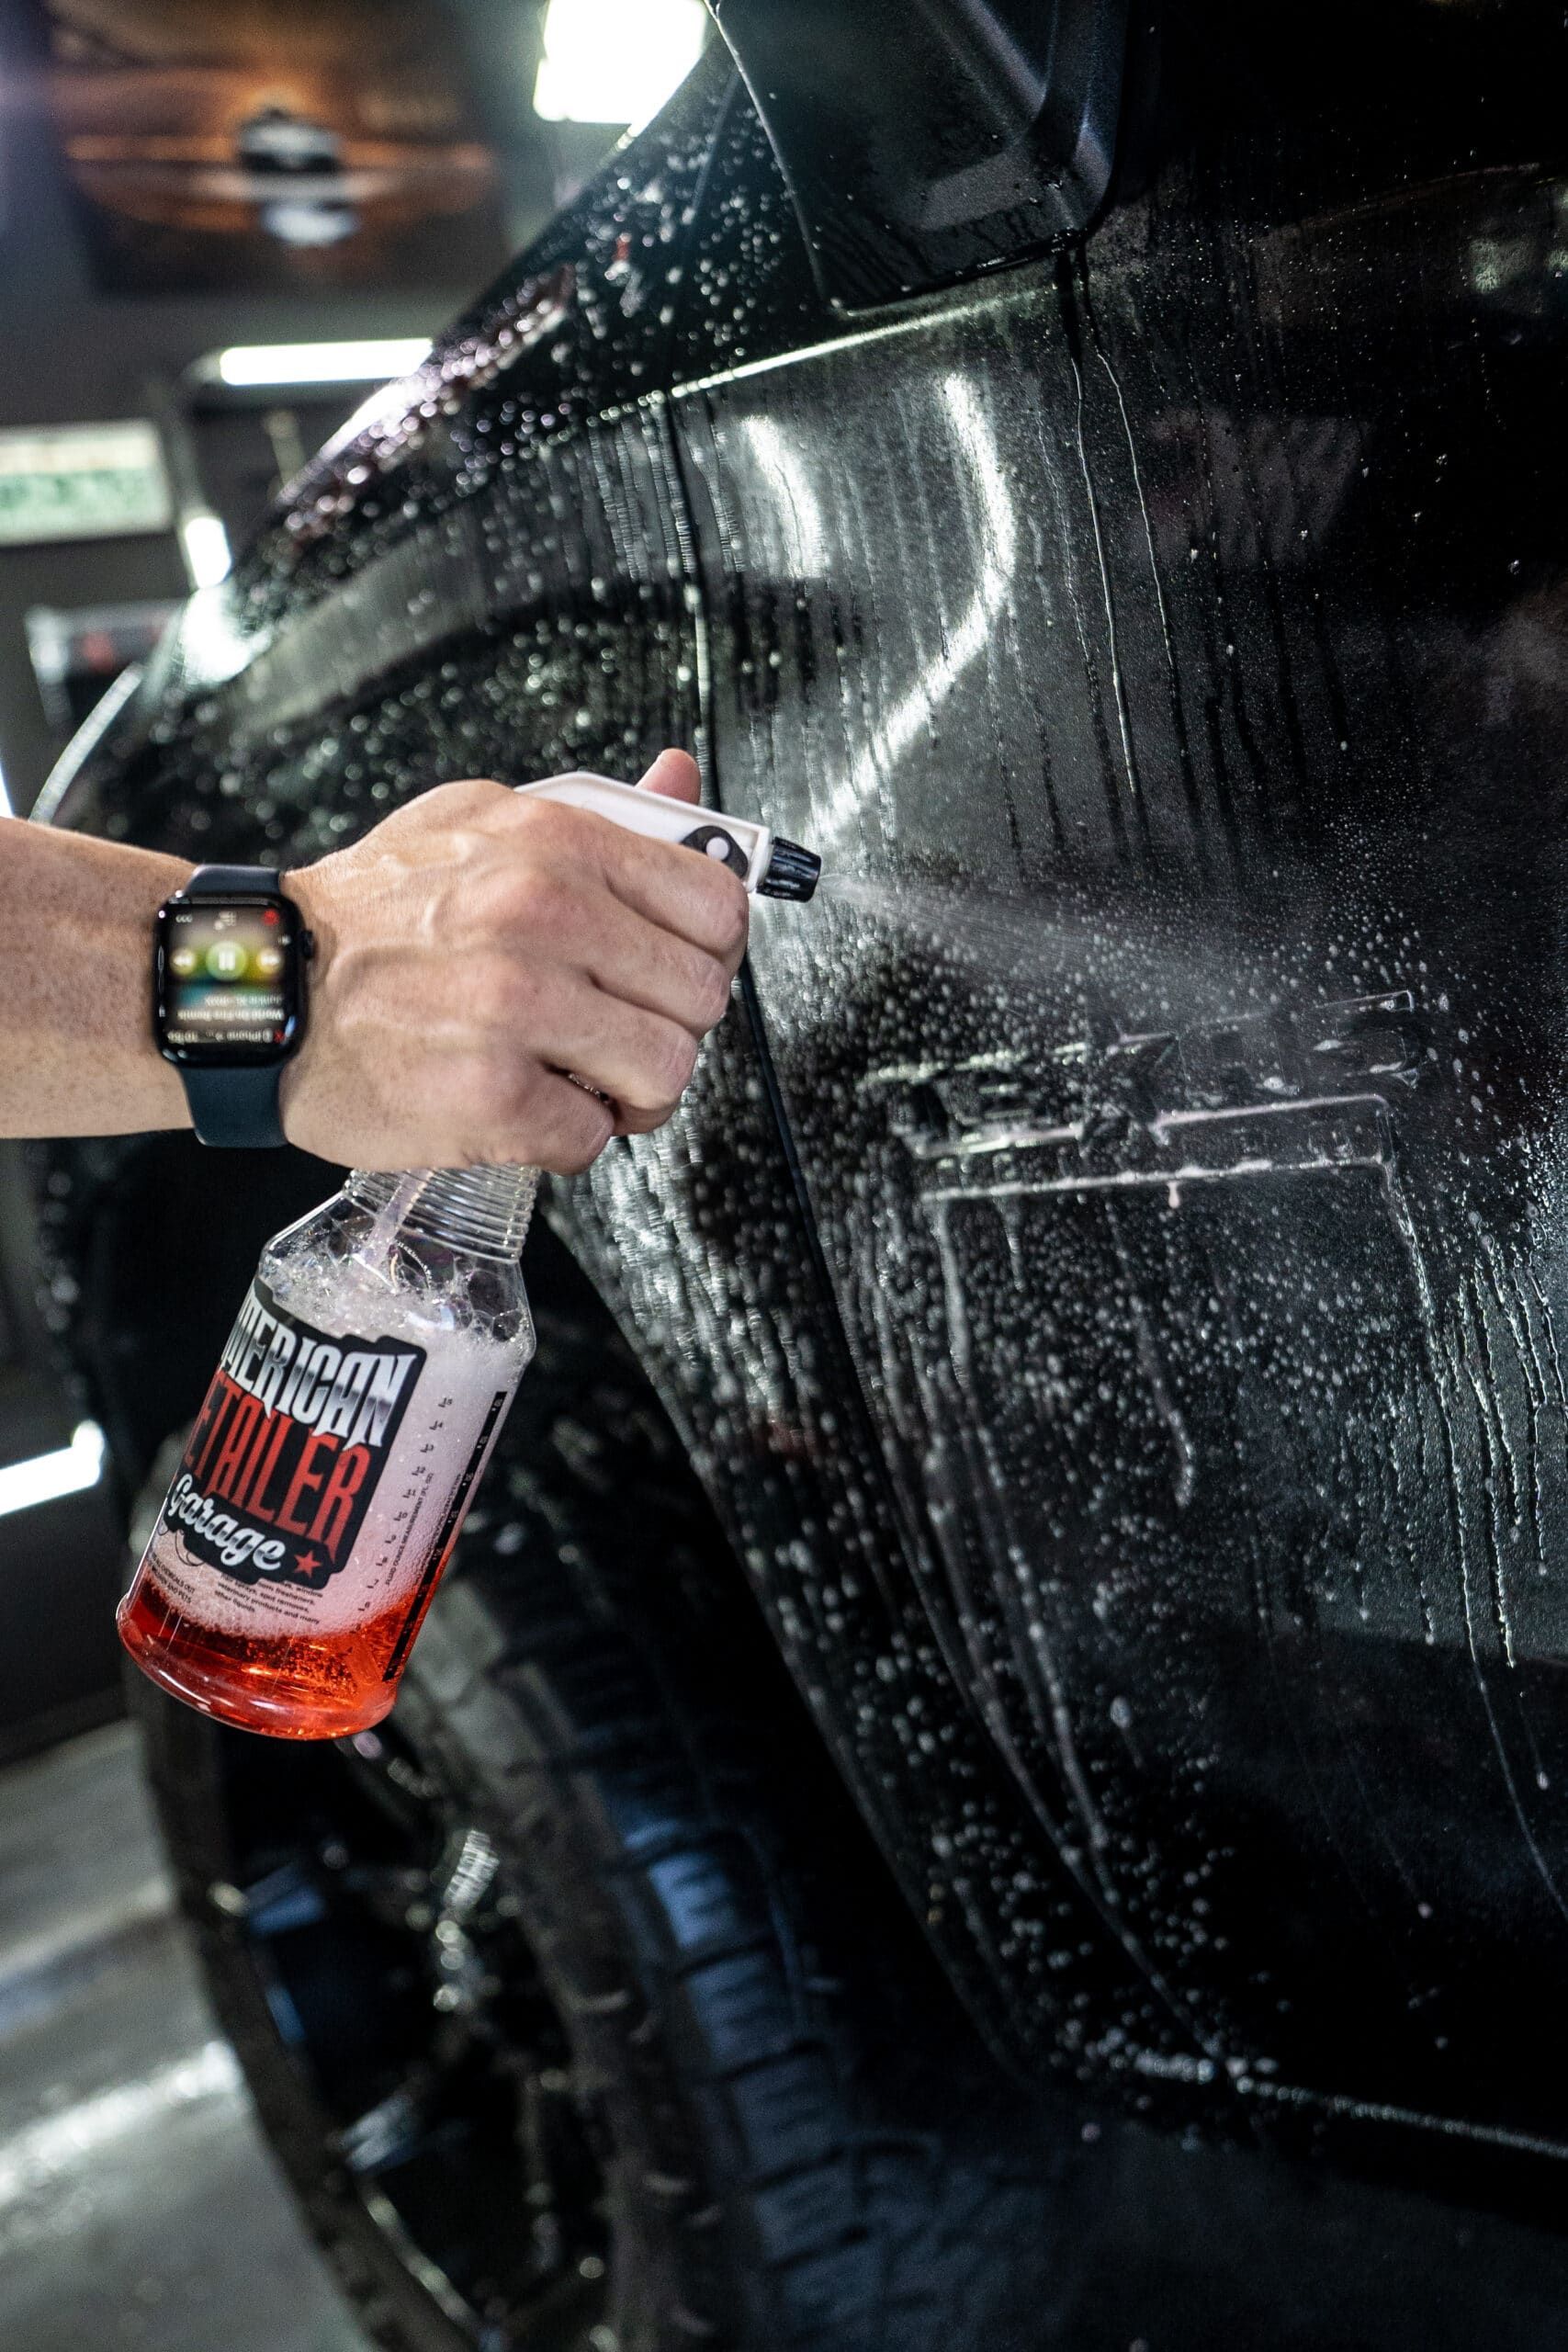 A person is washing a car with a spray bottle.